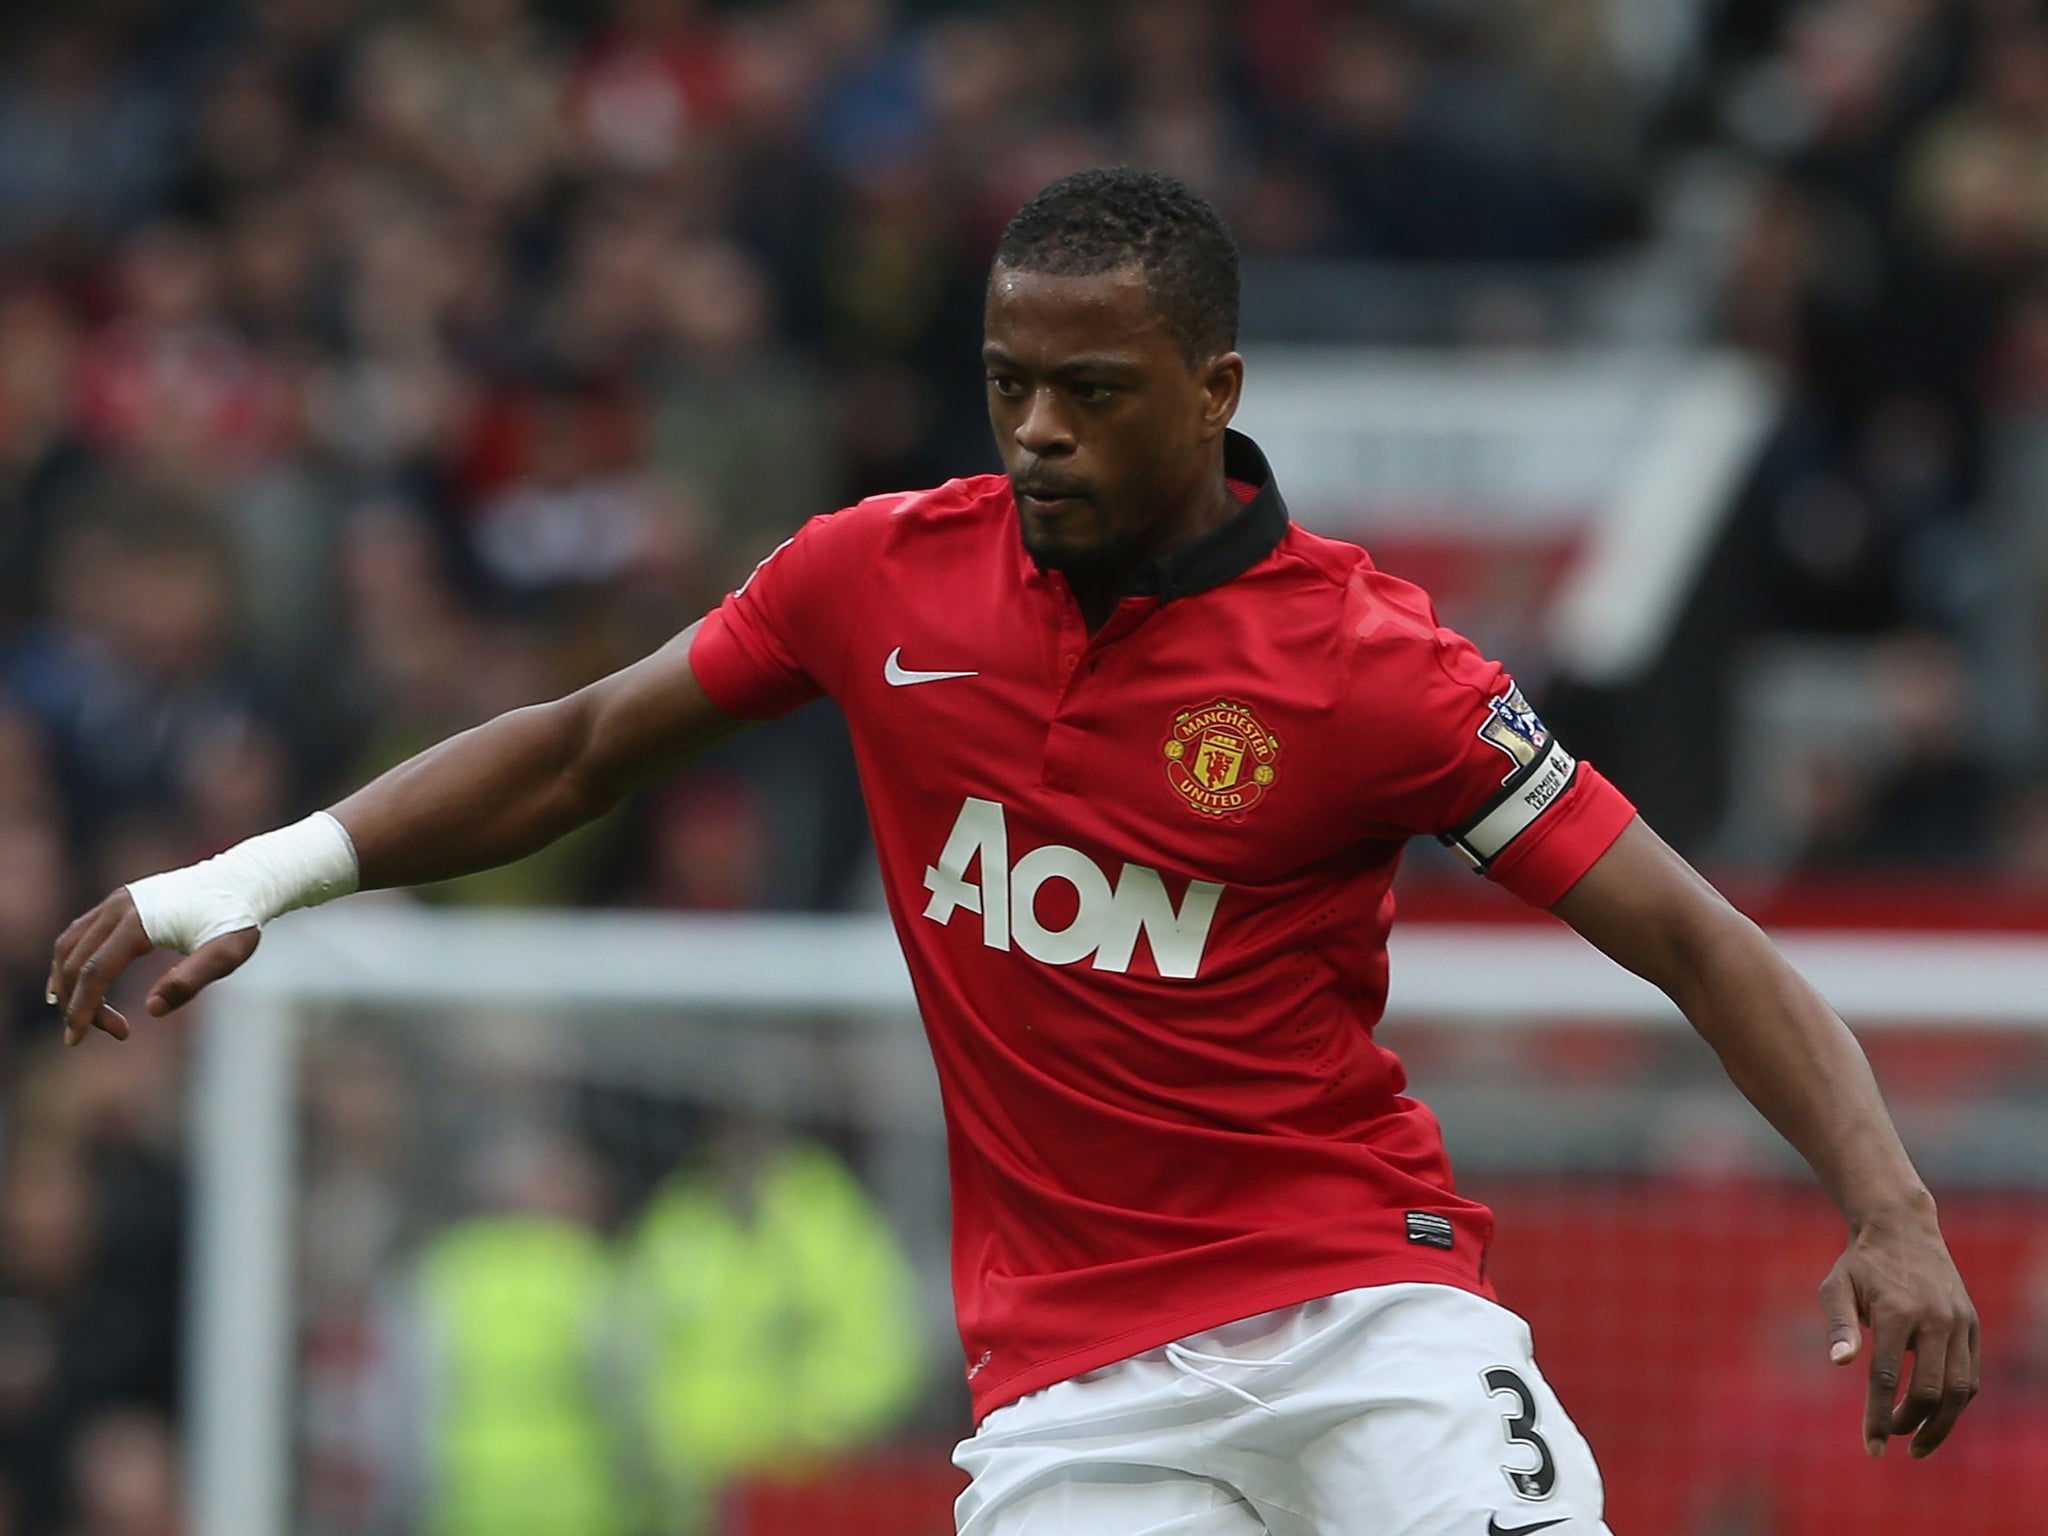 Manchester United defender Patrice Evra believes winning the Capital One Cup can help the club build a platform for future success